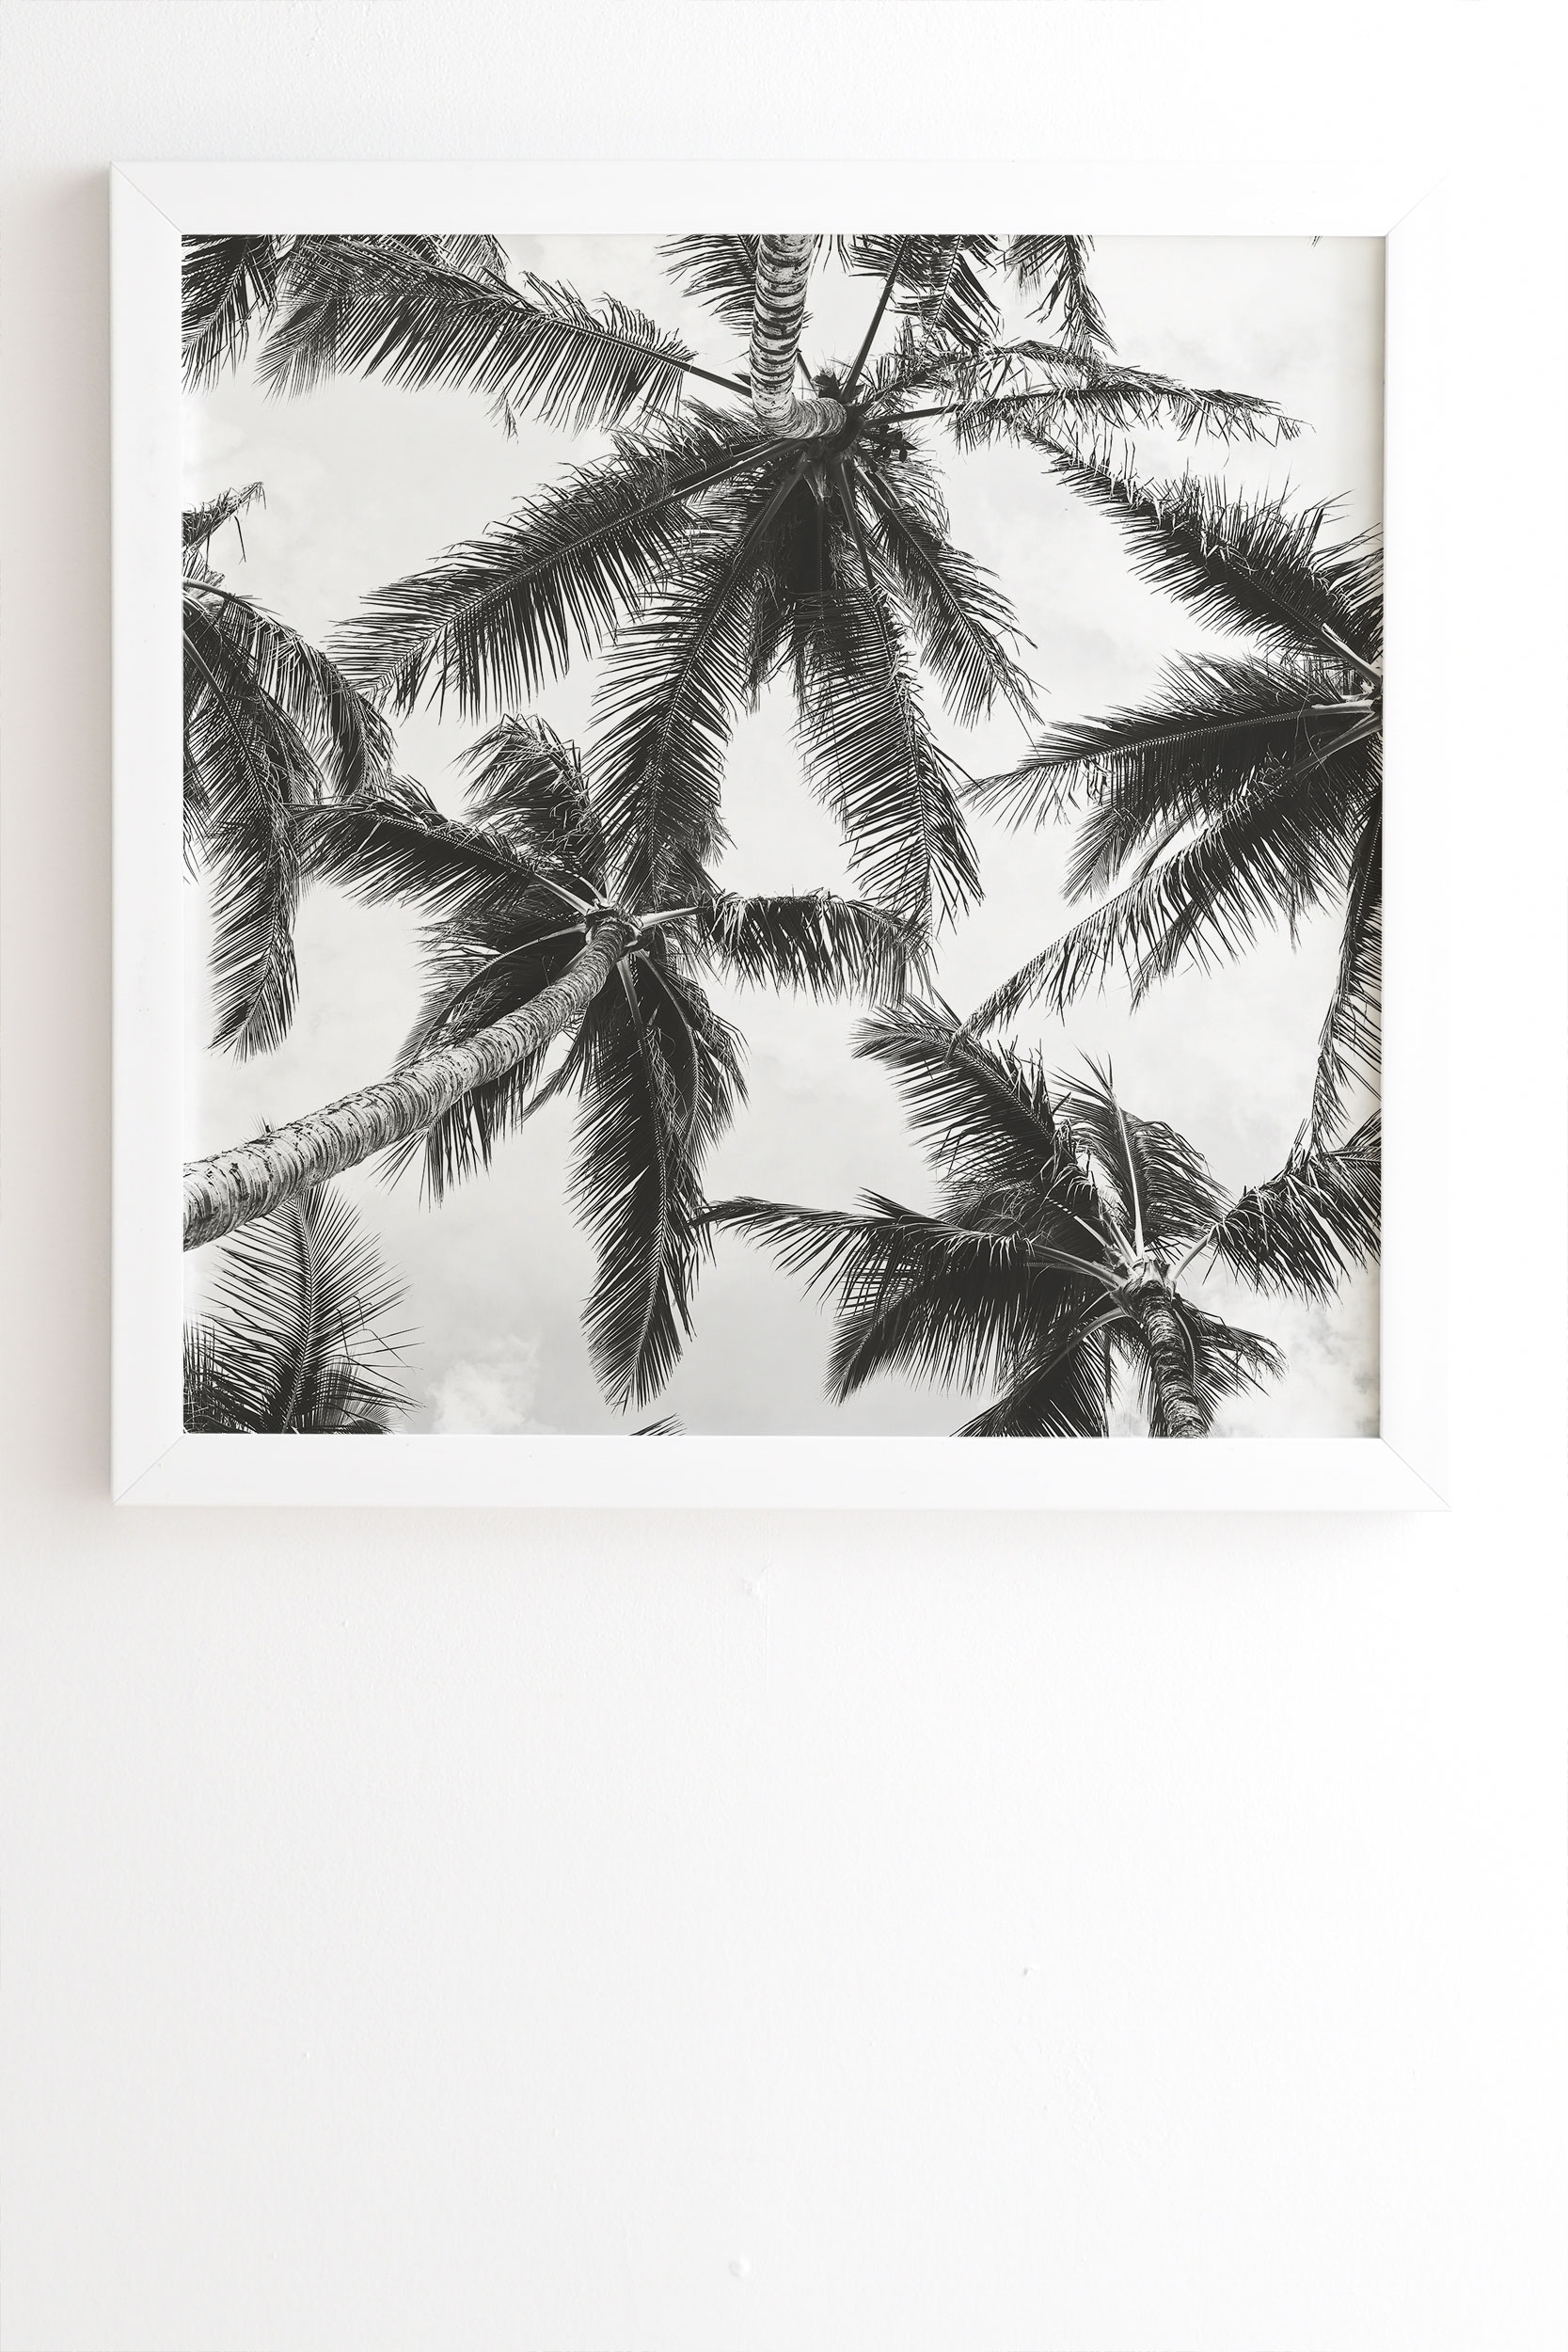 Under The Palms by Bree Madden - Framed Wall Art Basic White 8" x 9.5" - Image 1